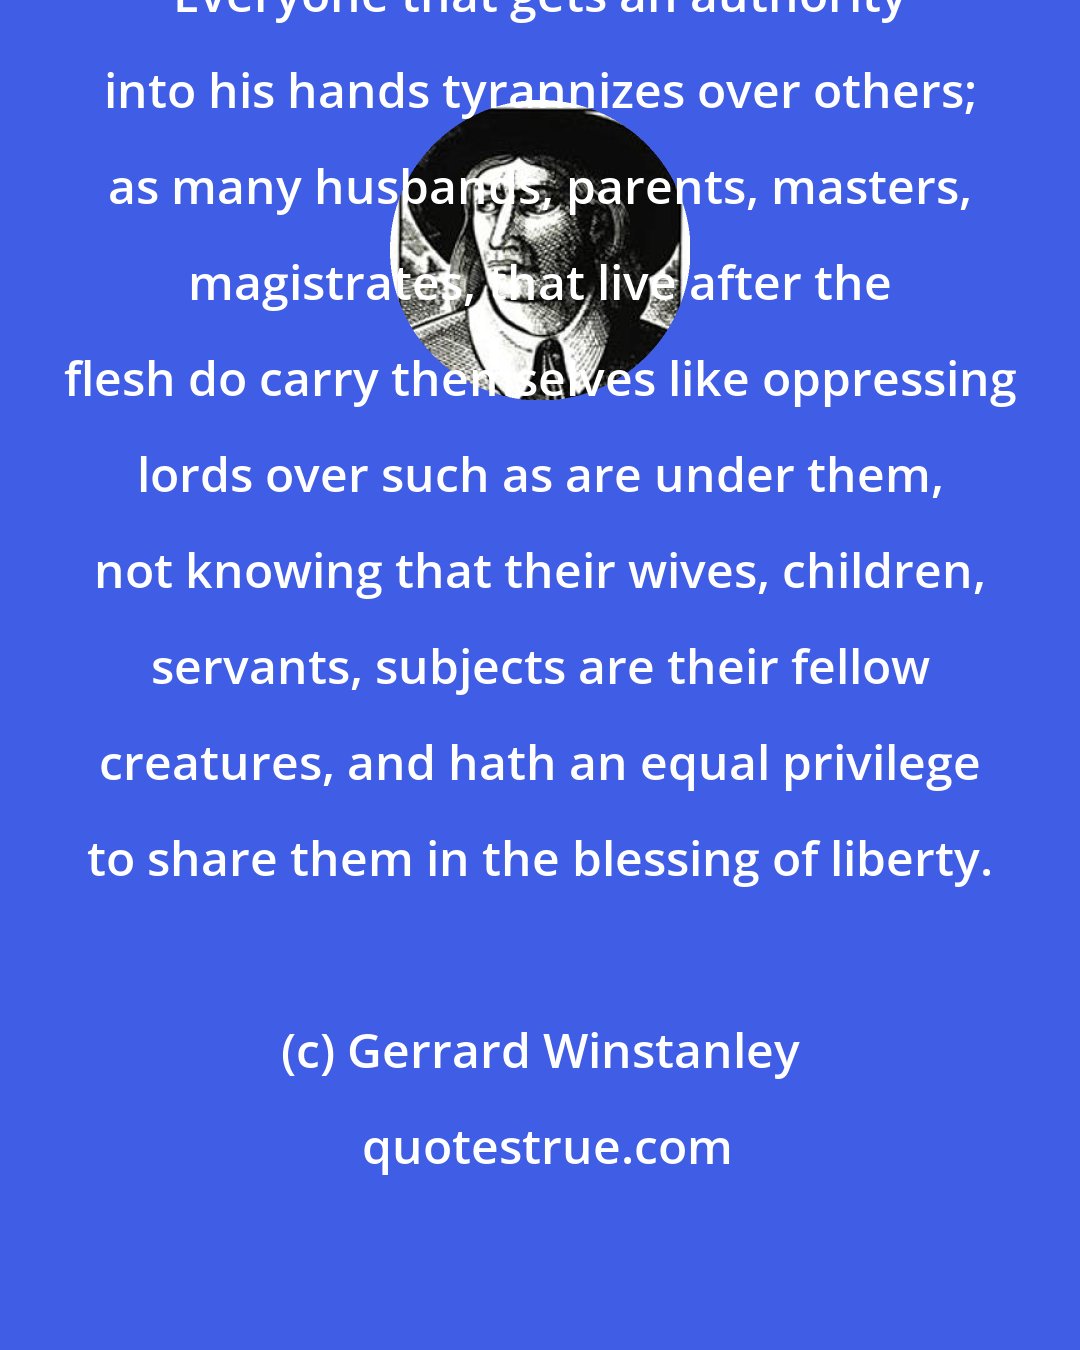 Gerrard Winstanley: Everyone that gets an authority into his hands tyrannizes over others; as many husbands, parents, masters, magistrates, that live after the flesh do carry themselves like oppressing lords over such as are under them, not knowing that their wives, children, servants, subjects are their fellow creatures, and hath an equal privilege to share them in the blessing of liberty.